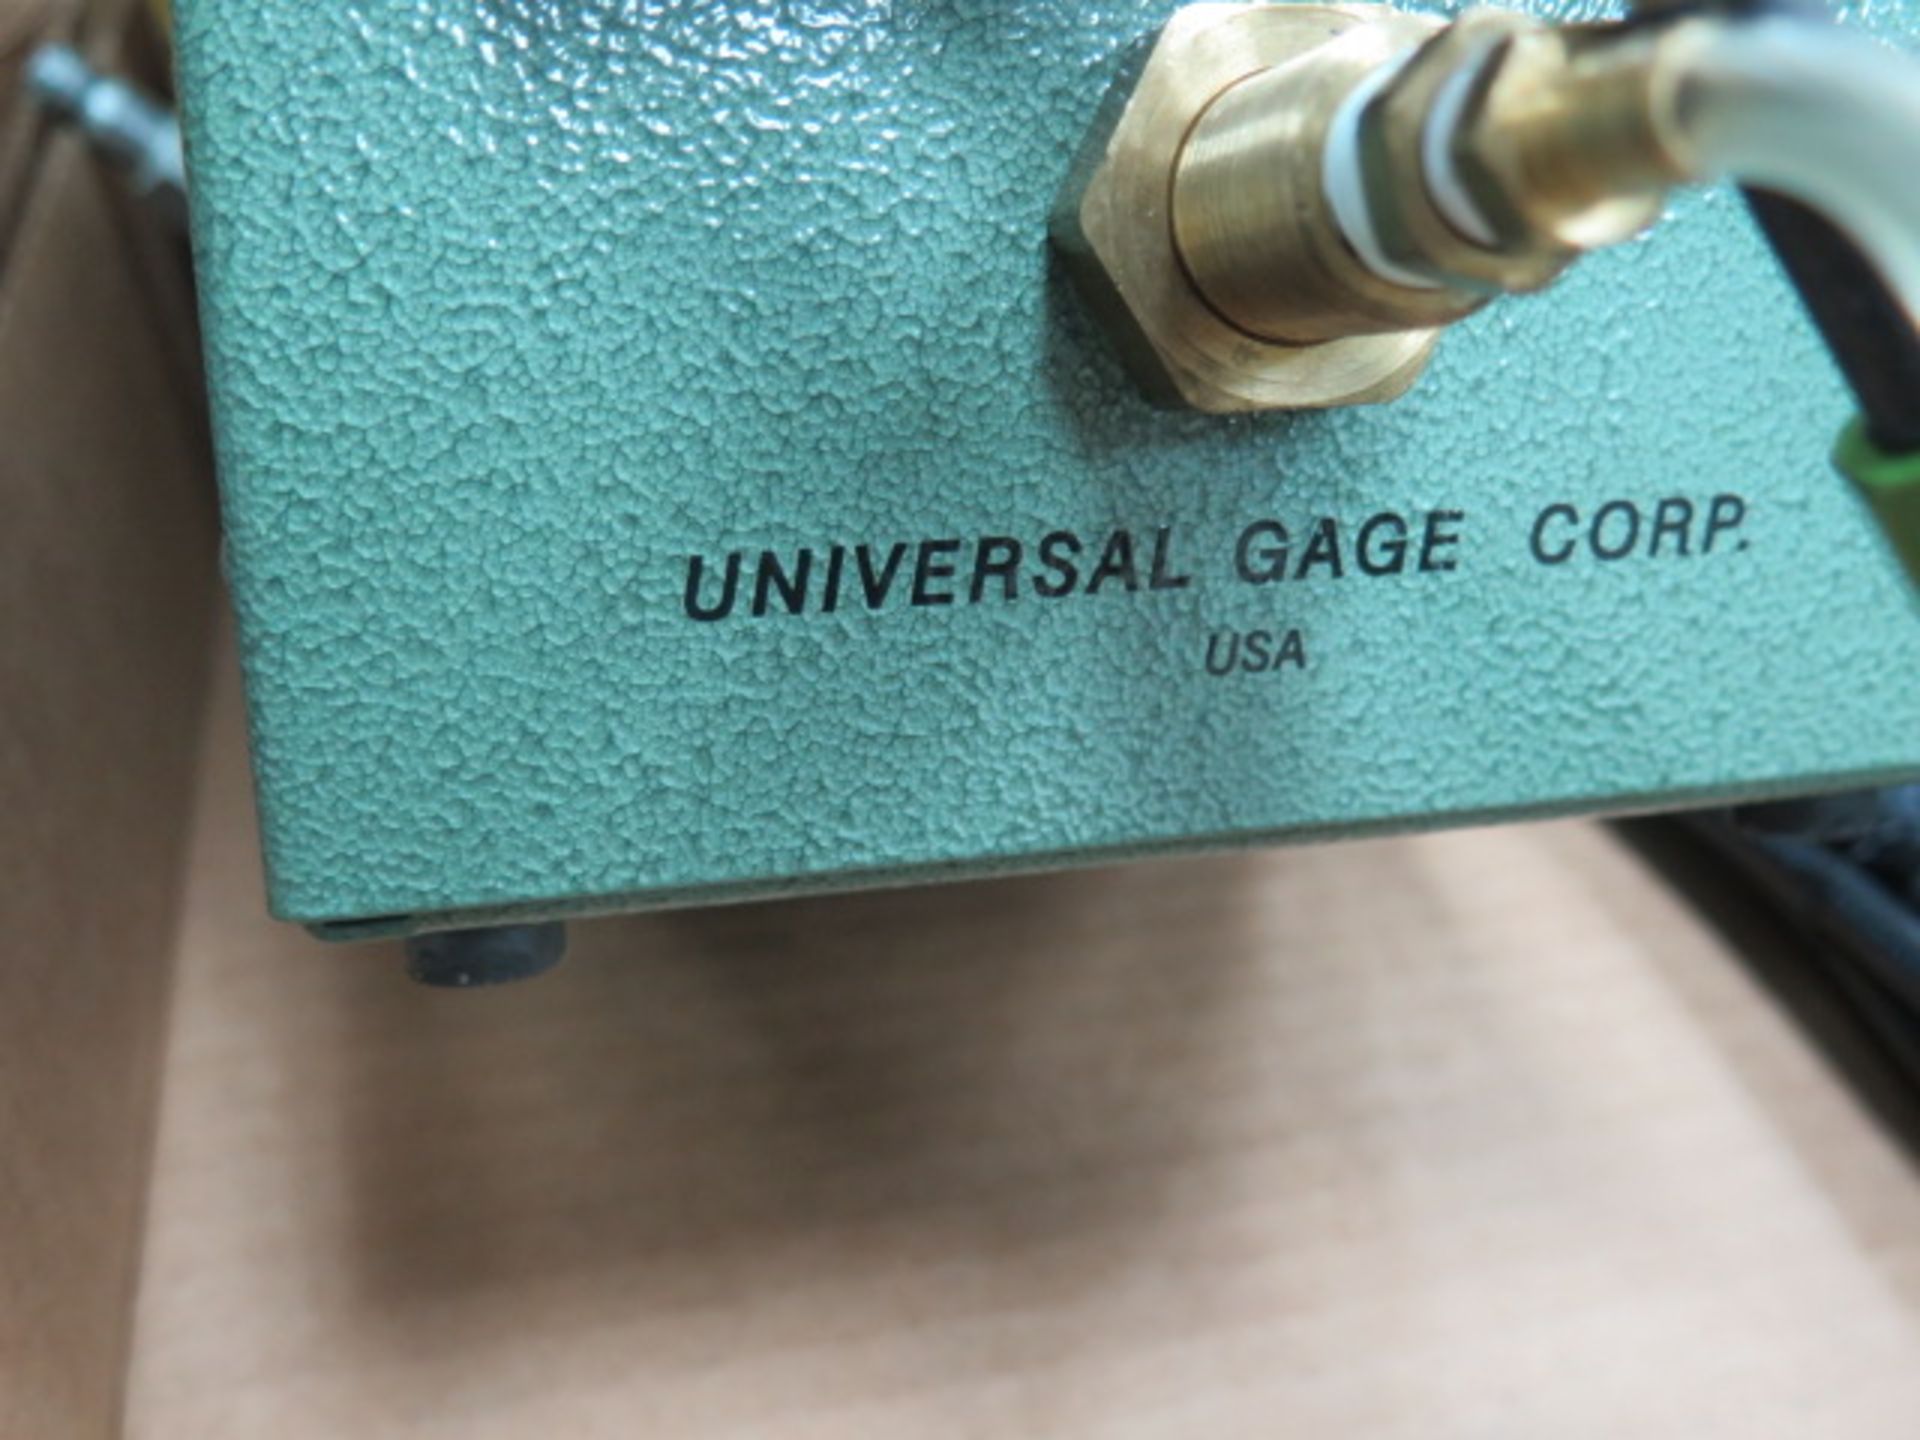 Universal Gage Corp mdl. DR-1 Universal Digital Air Gage (SOLD AS-IS - NO WARRANTY) - Image 6 of 6